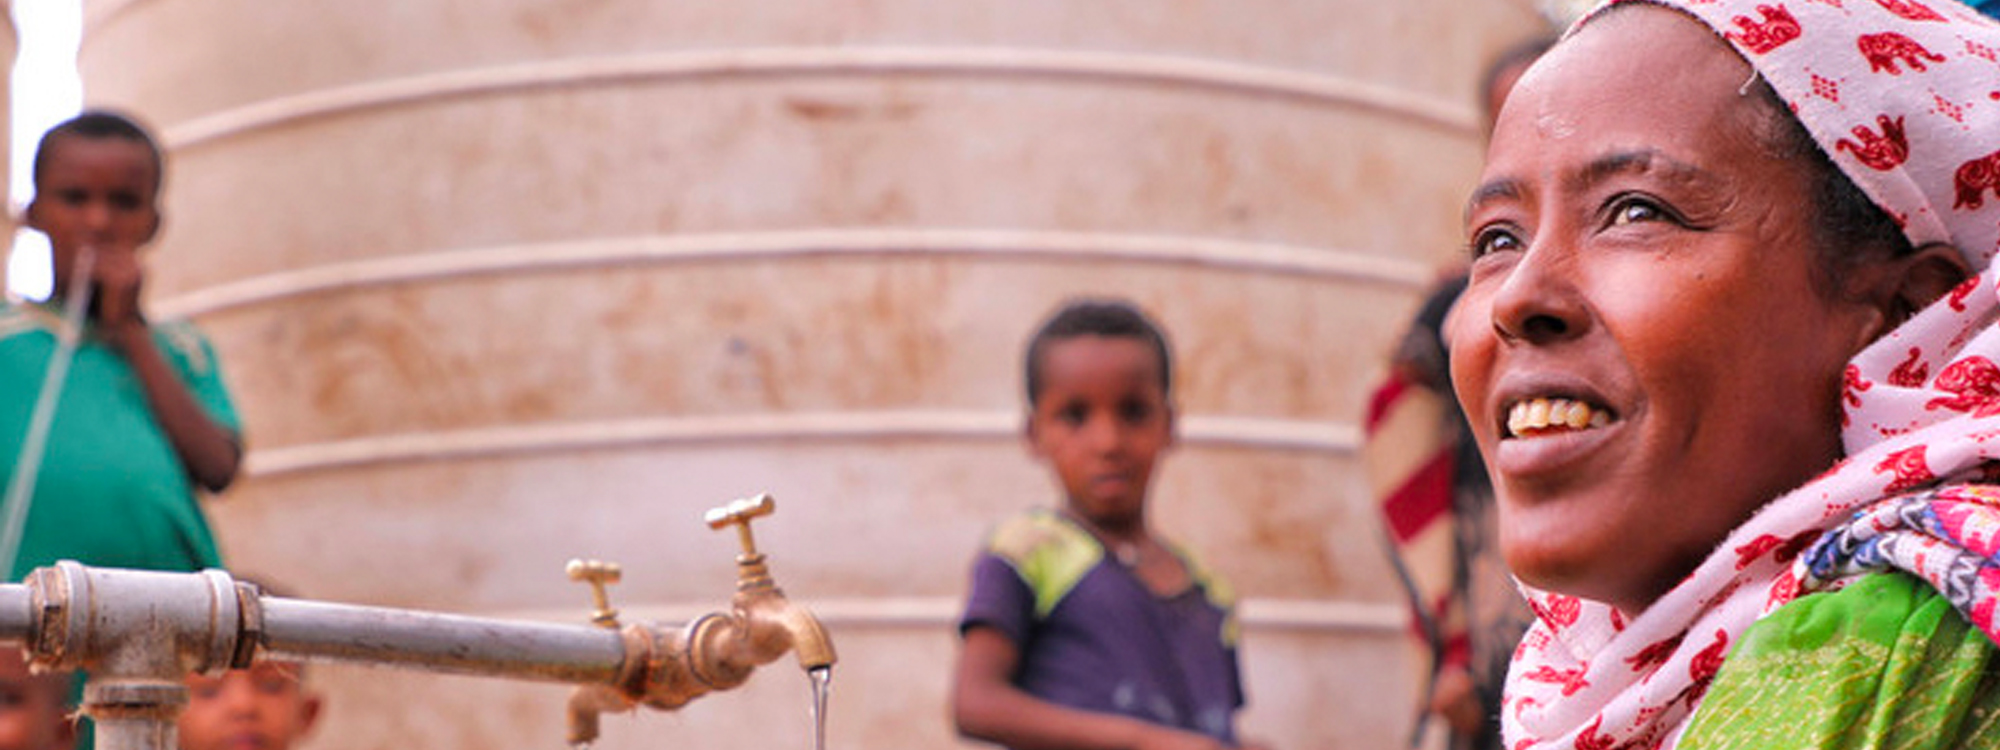 Woman, children and a water tap in Tigray, Ethiopia.